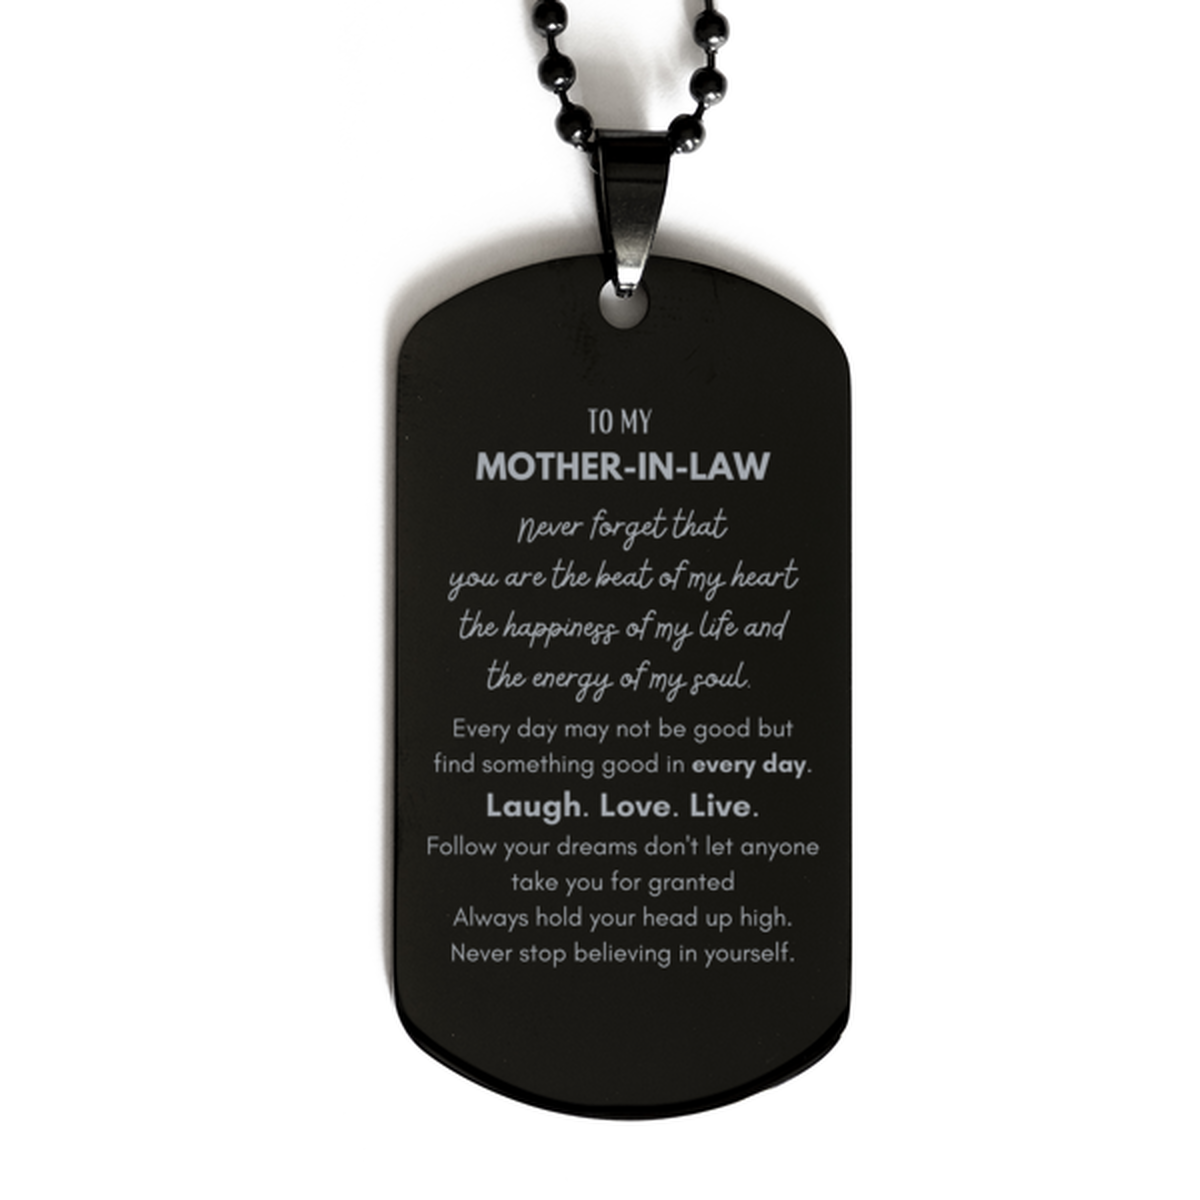 To My Mother-In-Law Dogtag Gifts, Christmas Mother-In-Law Black Dog Tag Present, Birthday Unique Motivational For Mother-In-Law, To My Mother-In-Law Never forget that you are the beat of my heart the happiness of my life and the energy of my soul